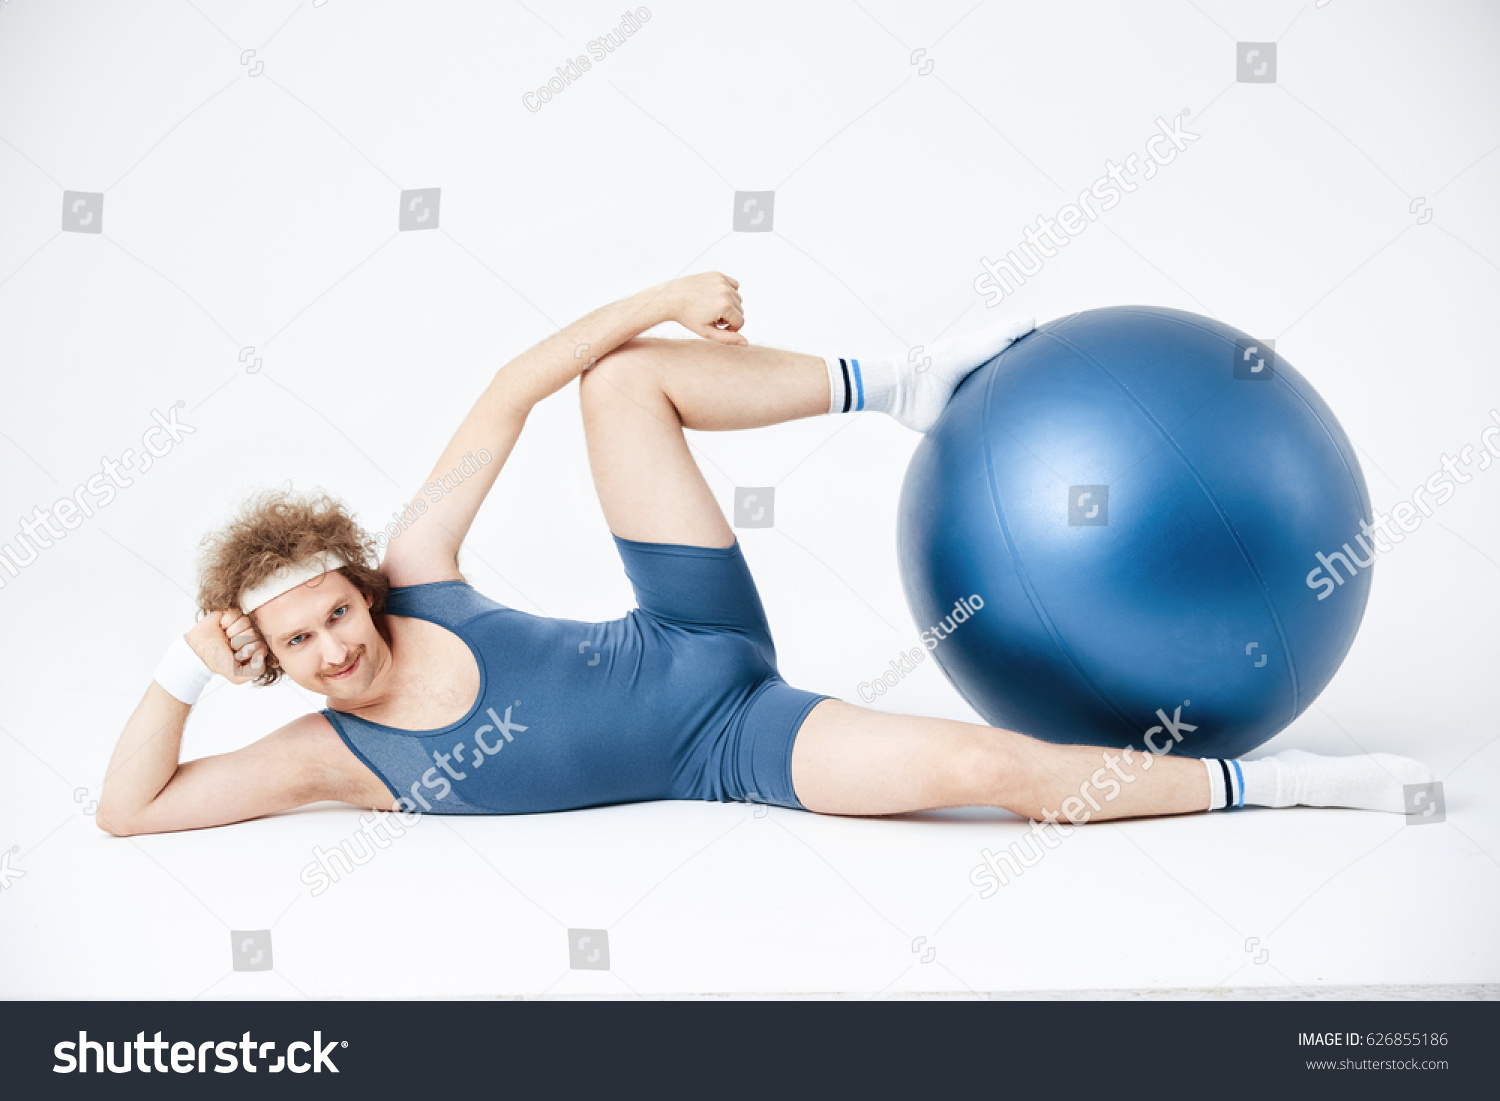 Man posing lying on floor, holding exercise ball with legs #626855186